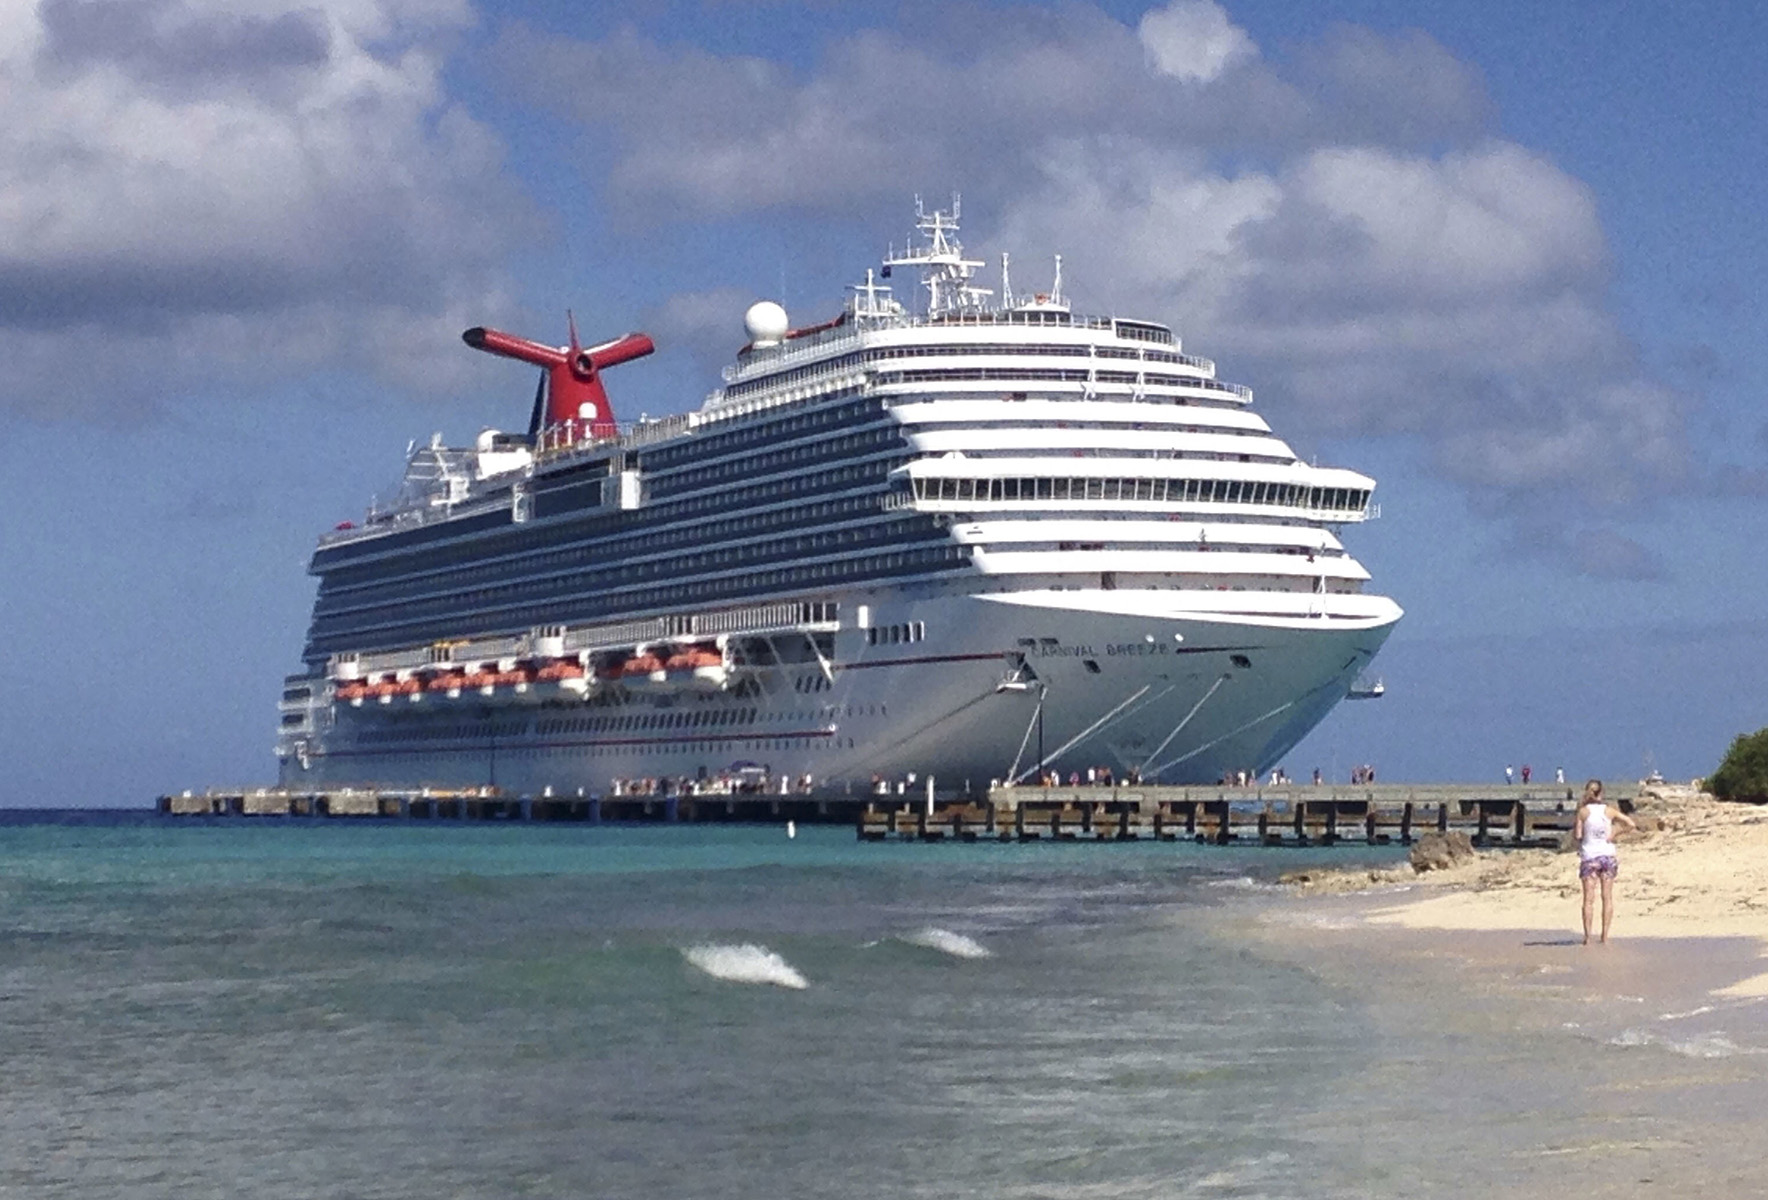 Best of Carnival breeze pictures